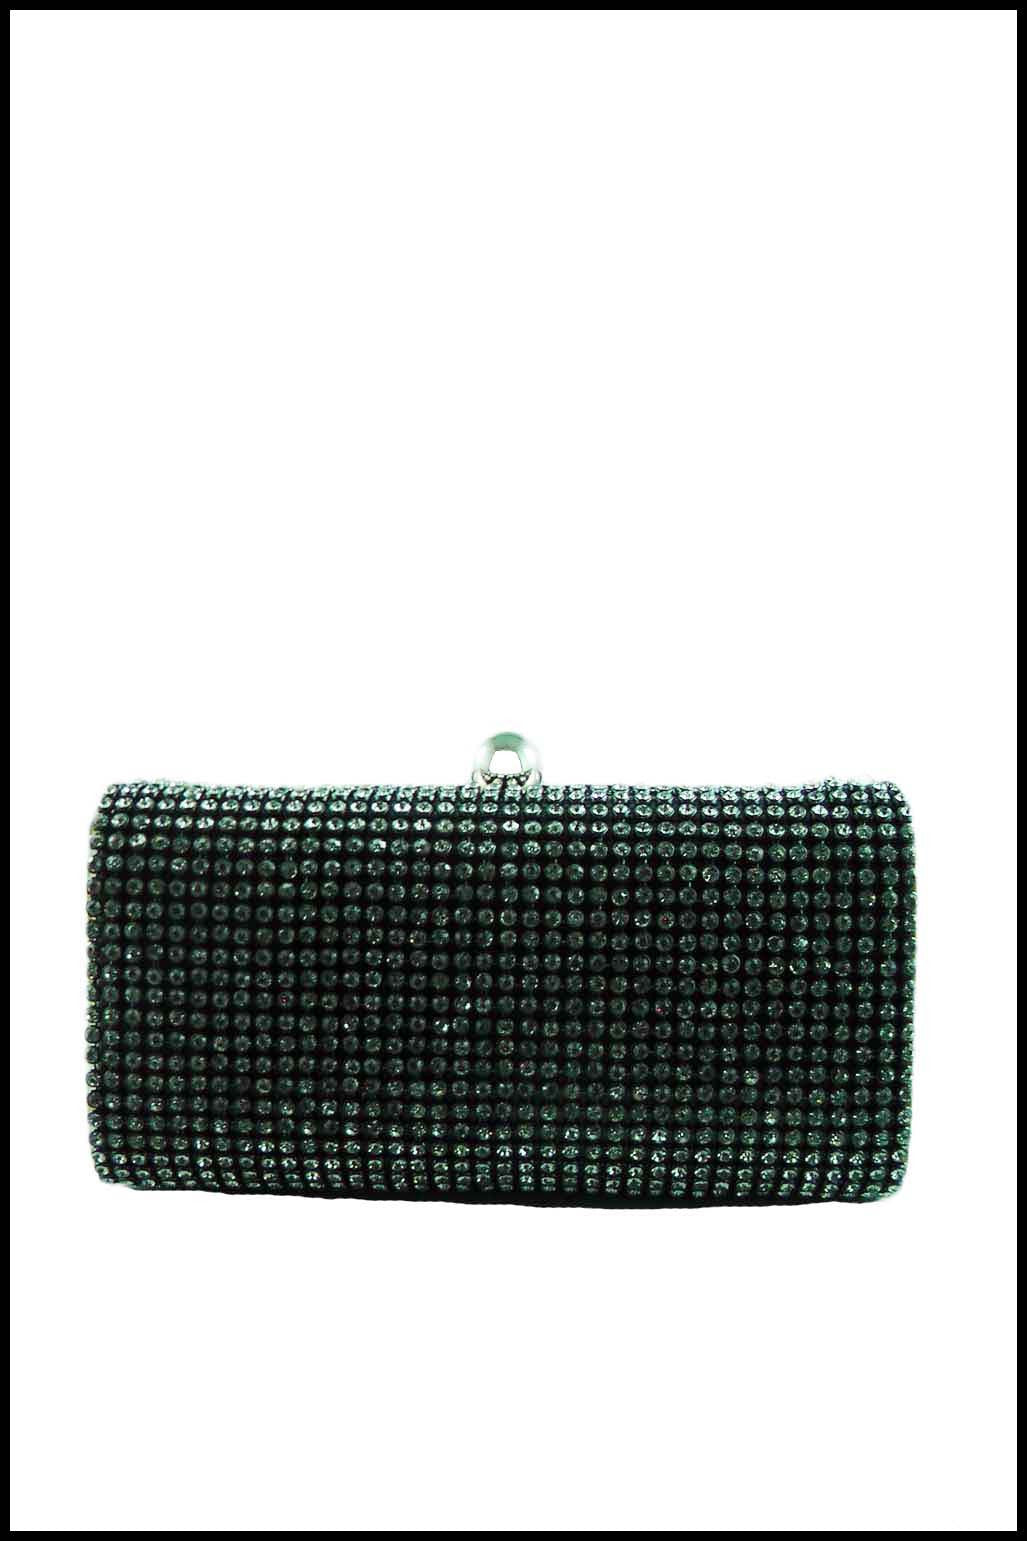 Hard-shell Evening Clutch with Rhinestone Front and Clasp